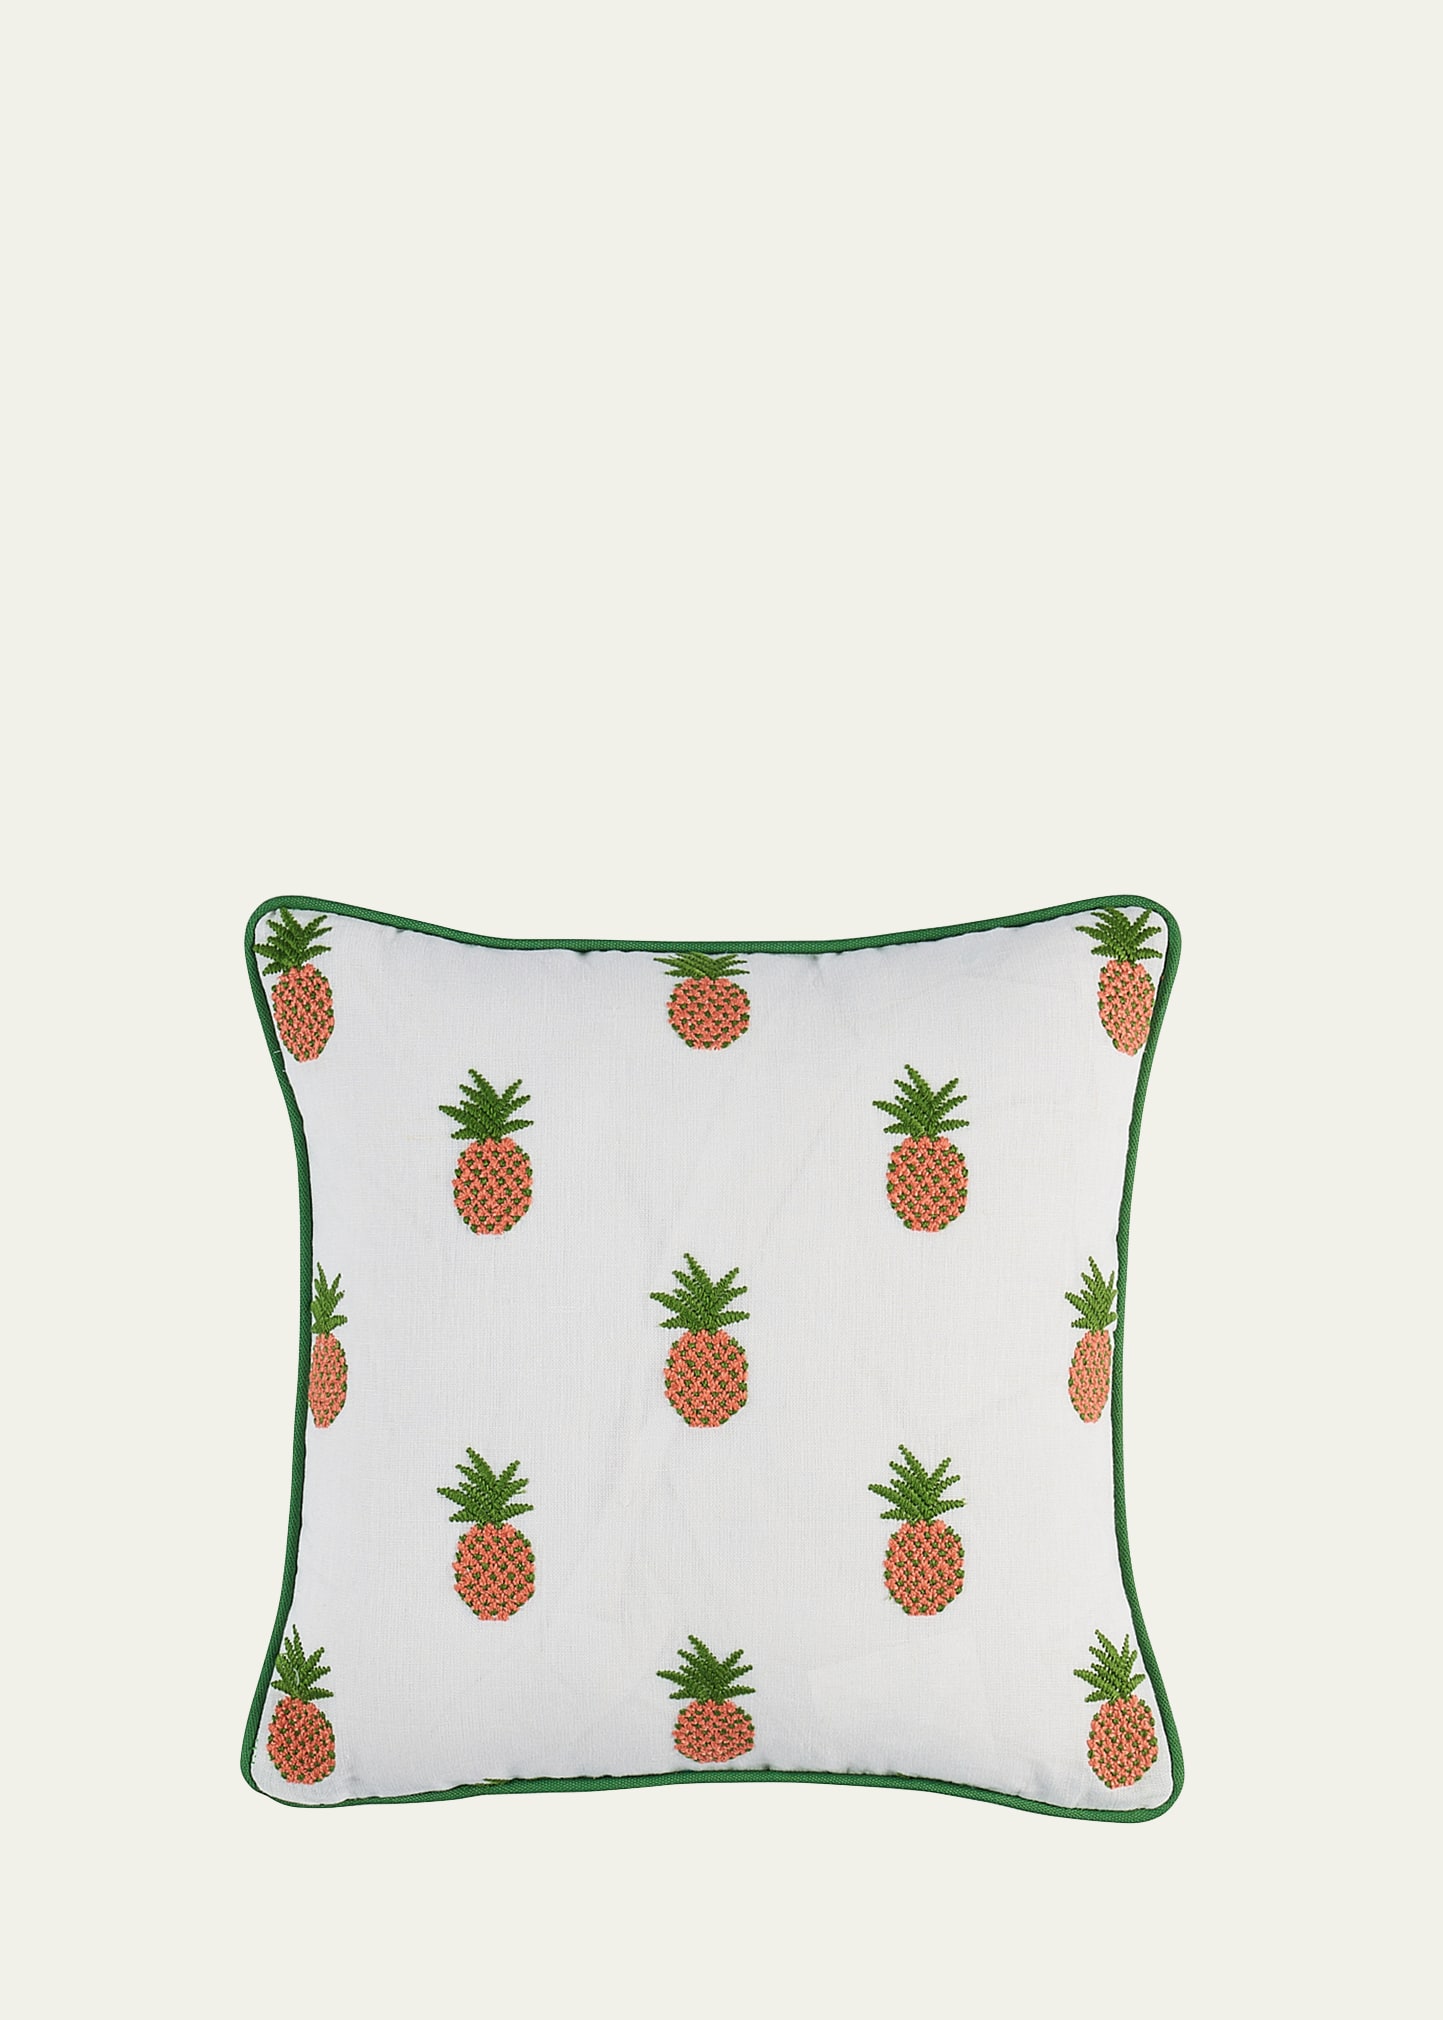 Pineapple Embroidery Pillow